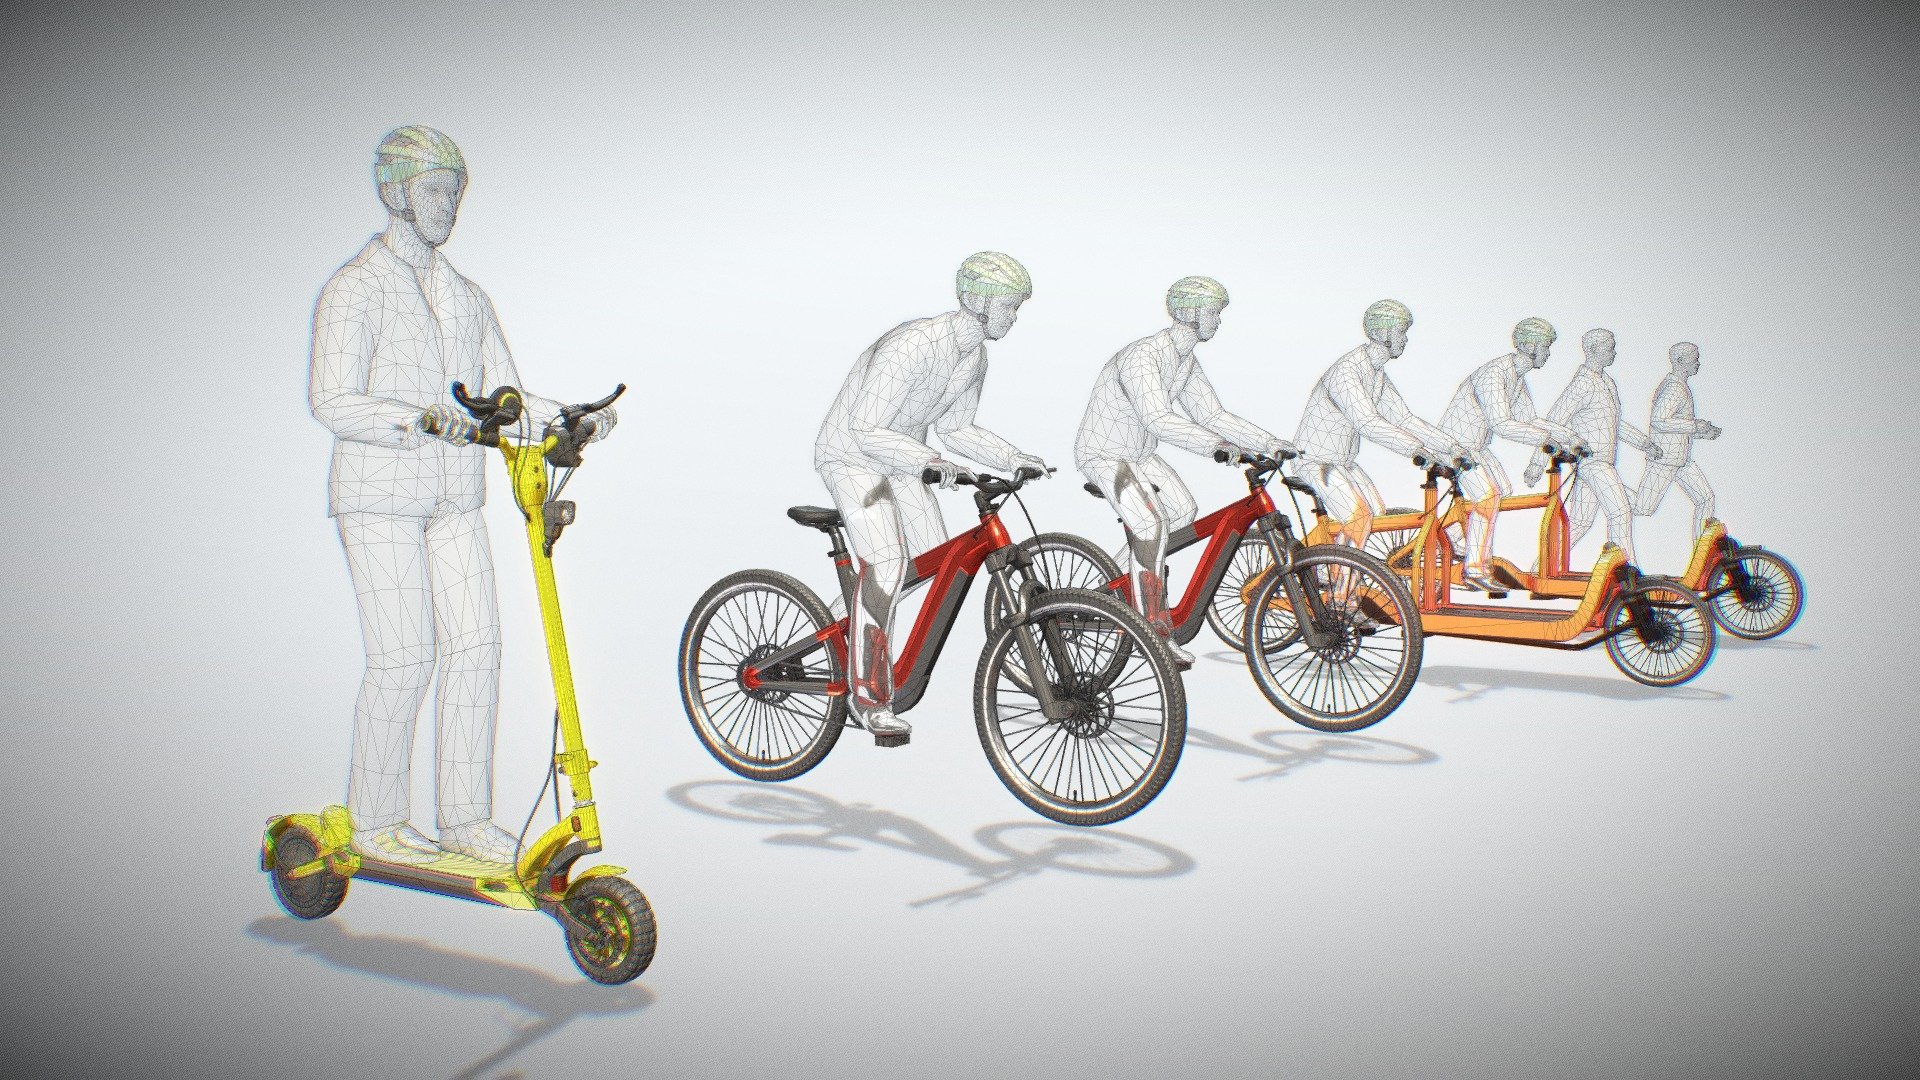 E-Scooter Update.




Bicycle Animations Cargo Bike Update

Cyclist Cycling Cycles Animation (Test) 

Cycling Animation (Normal Speed)

Cycling Animation (Sprint Speed)

Cycling Animations and Waklcycle (Test)



3D modeled and textured by 3DHaupt in Blender 2.93 3d model